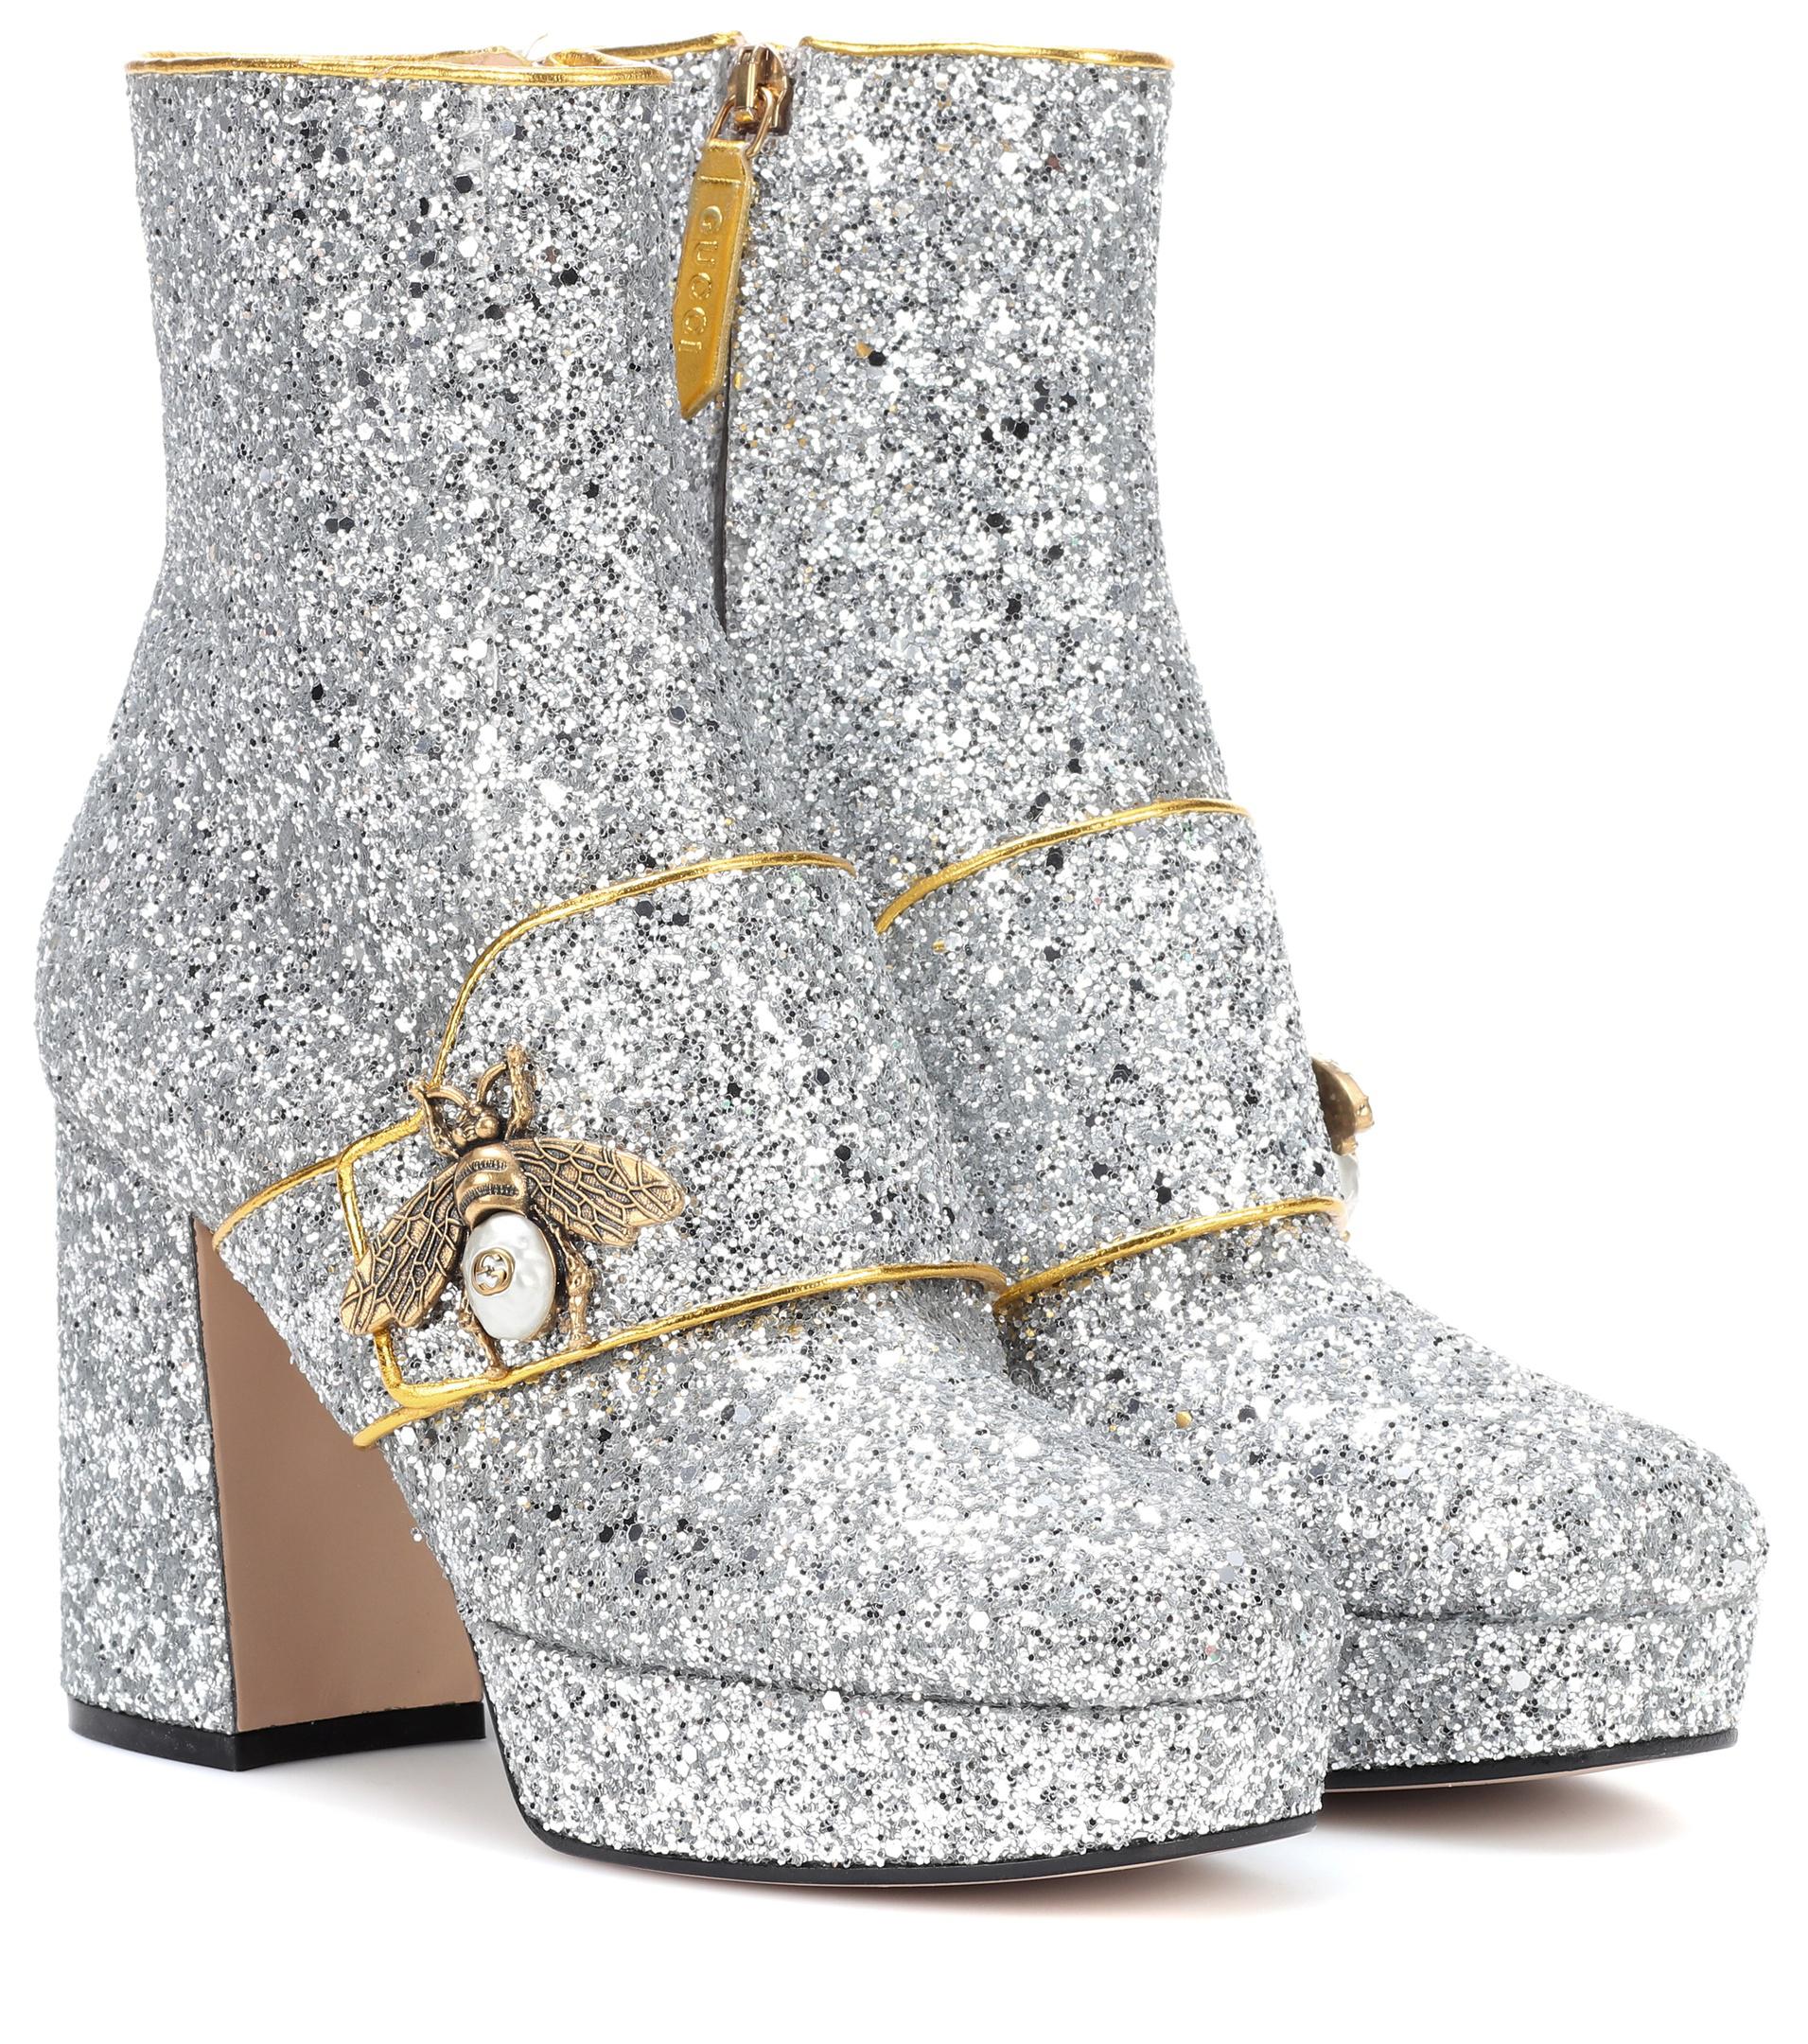 Lyst Gucci  Glitter Plateau Ankle Boots in Metallic